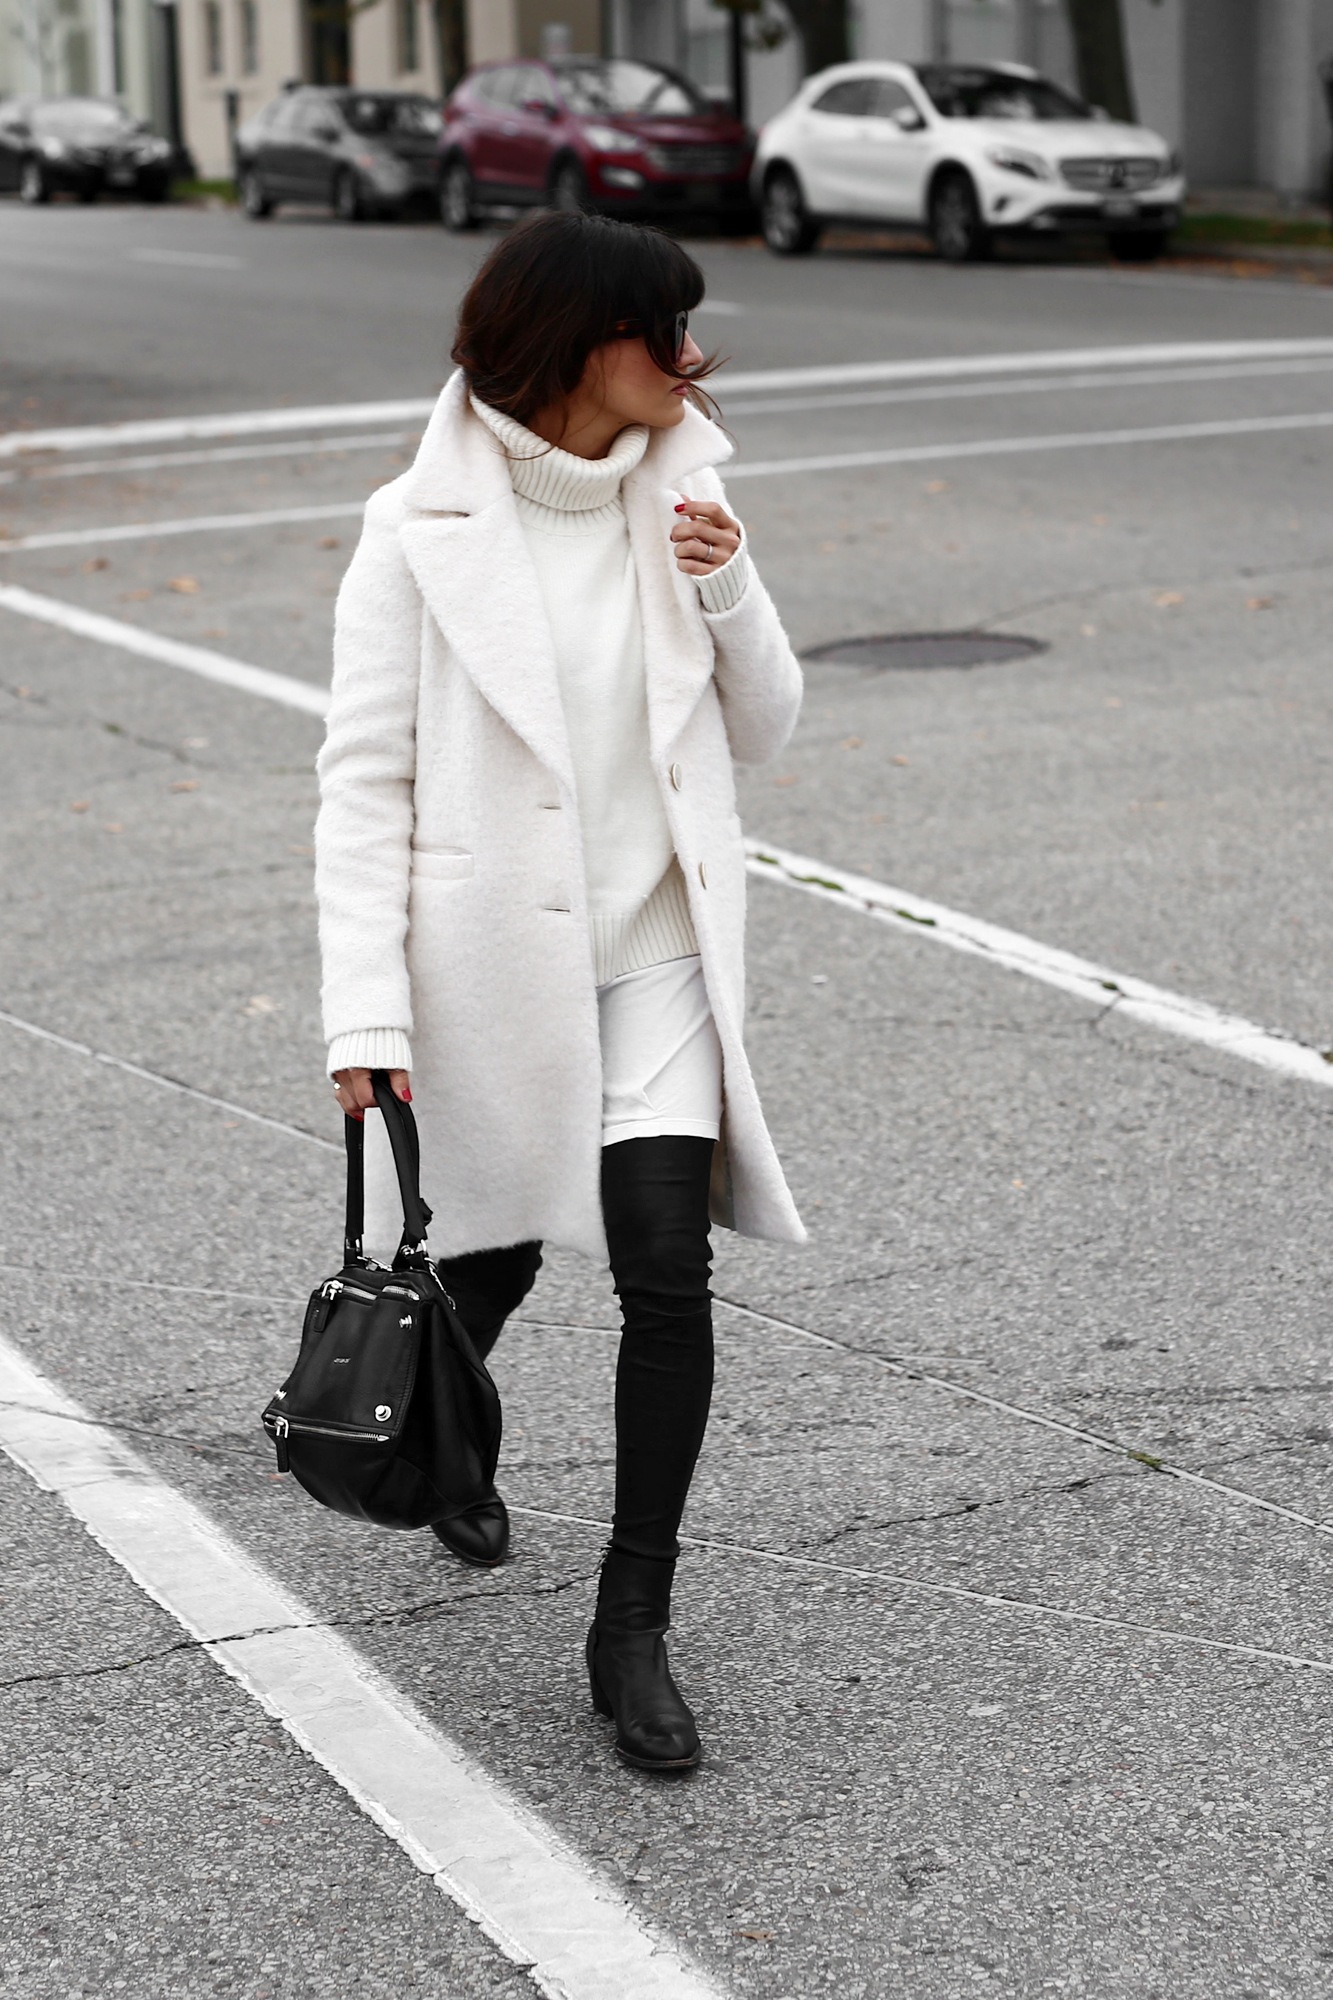 Winter White oversized knit, coat, leather leggings, Givenchy leopard print studded boots and Givenchy Pandora bag street style_2699.jpg